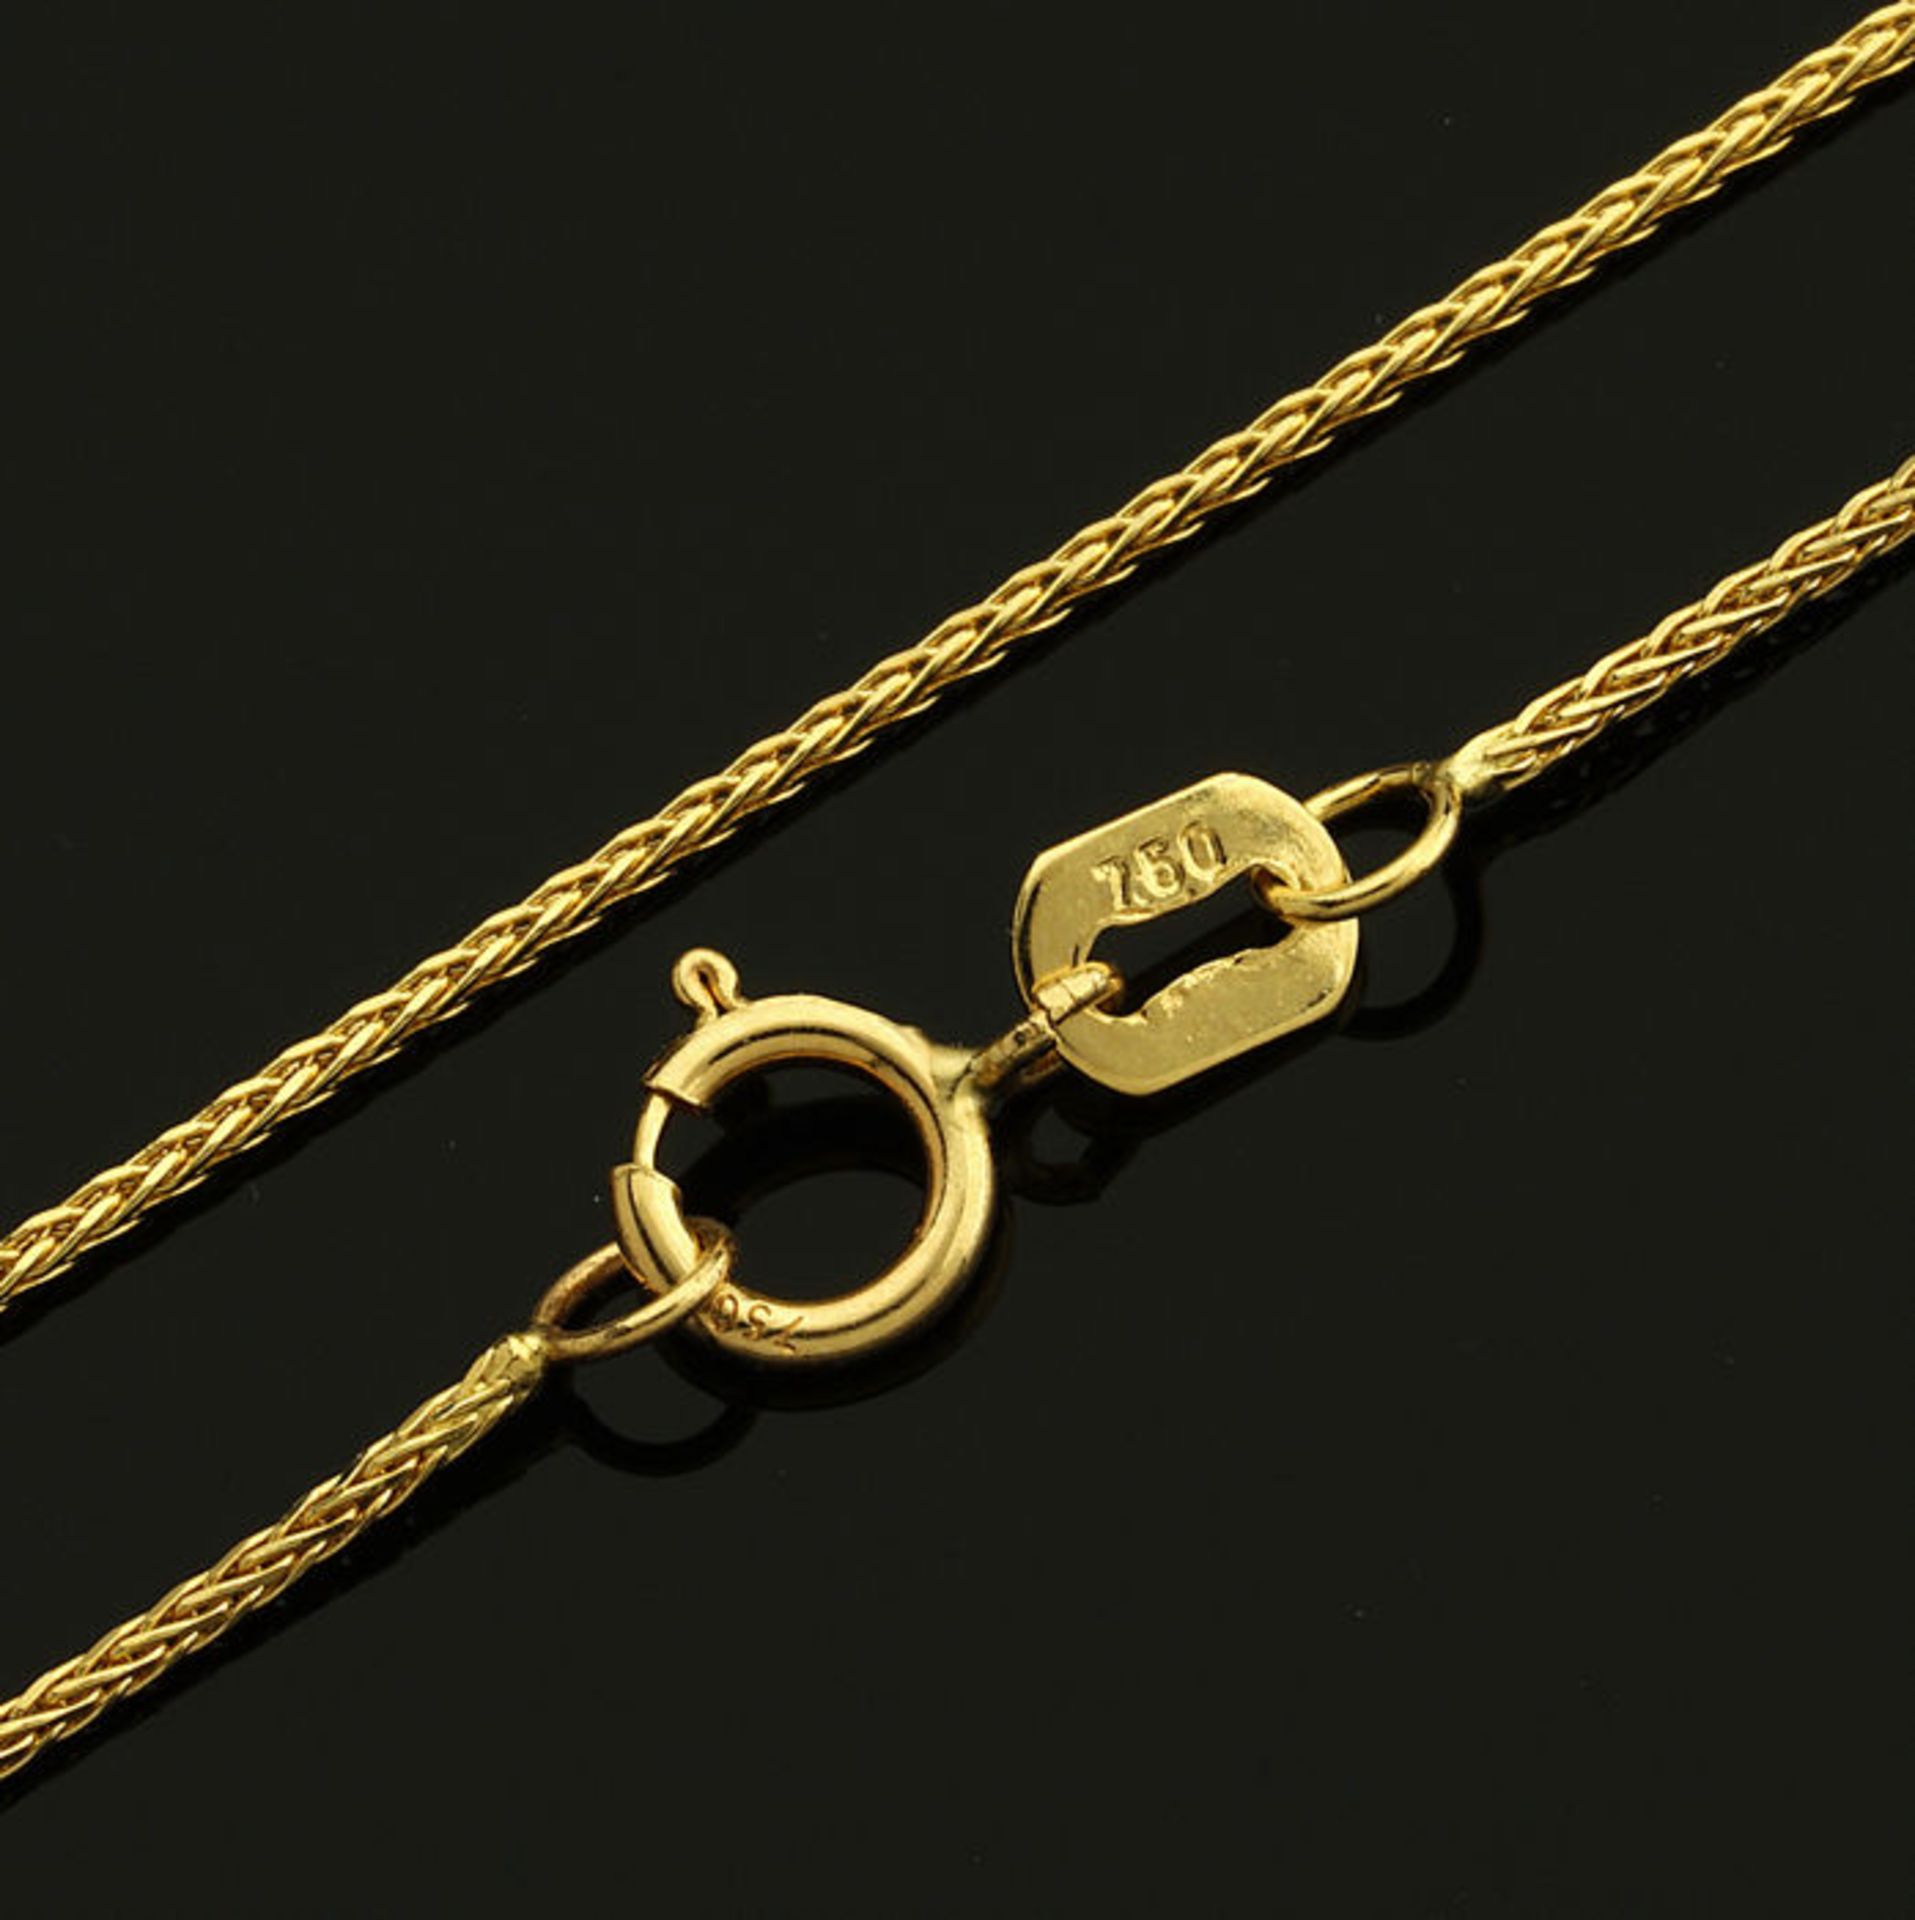 Wheat / Spiga Chain Necklace In 14K Yellow Gold. 17.7 In (45 cm) - Image 3 of 4